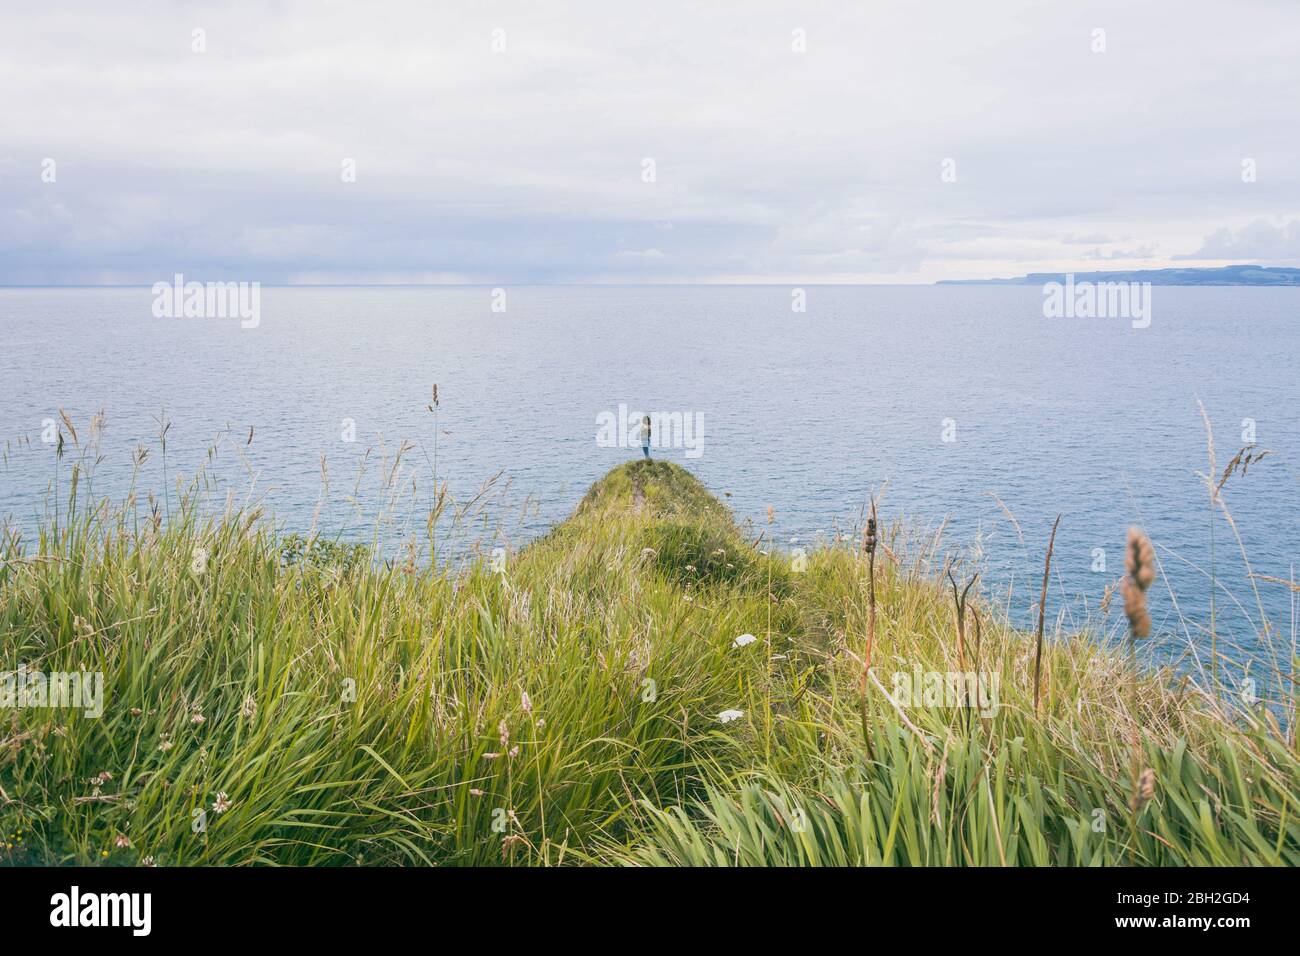 Young woman standing on grass at the cost, looking at the sea Stock Photo